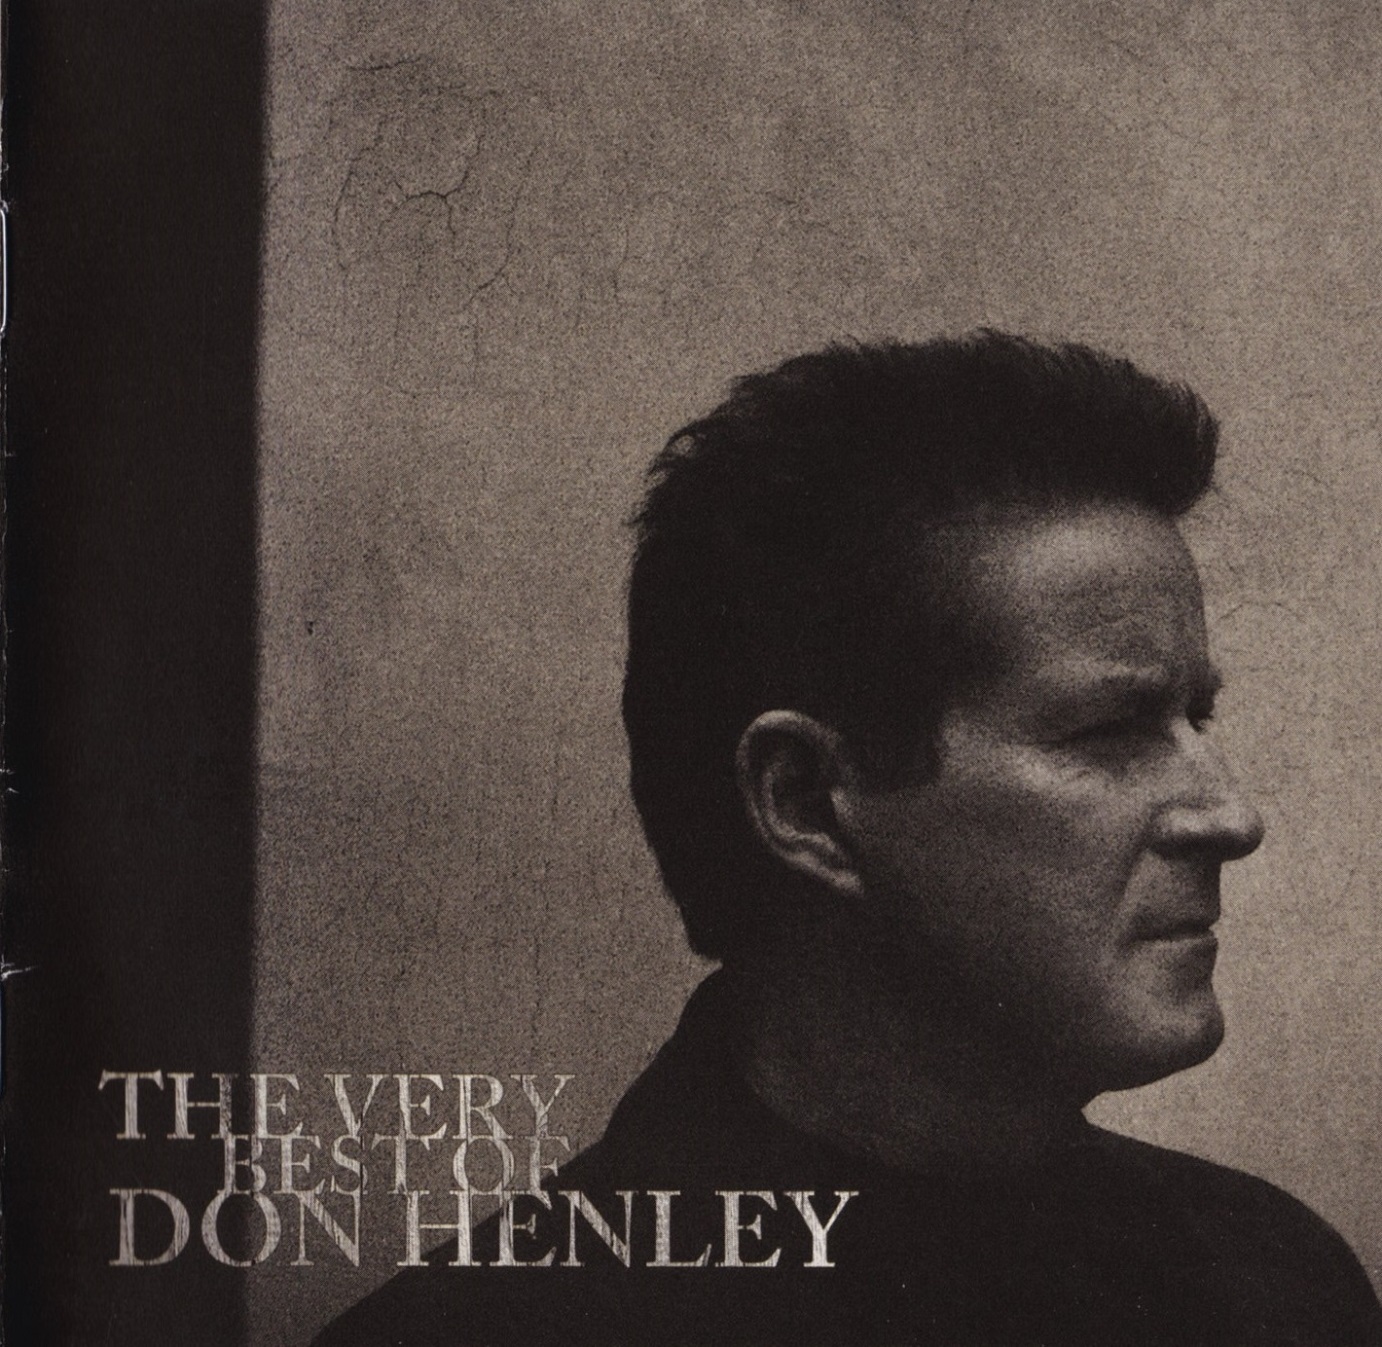 Release “The Very Best of Don Henley” by Don Henley - MusicBrainz